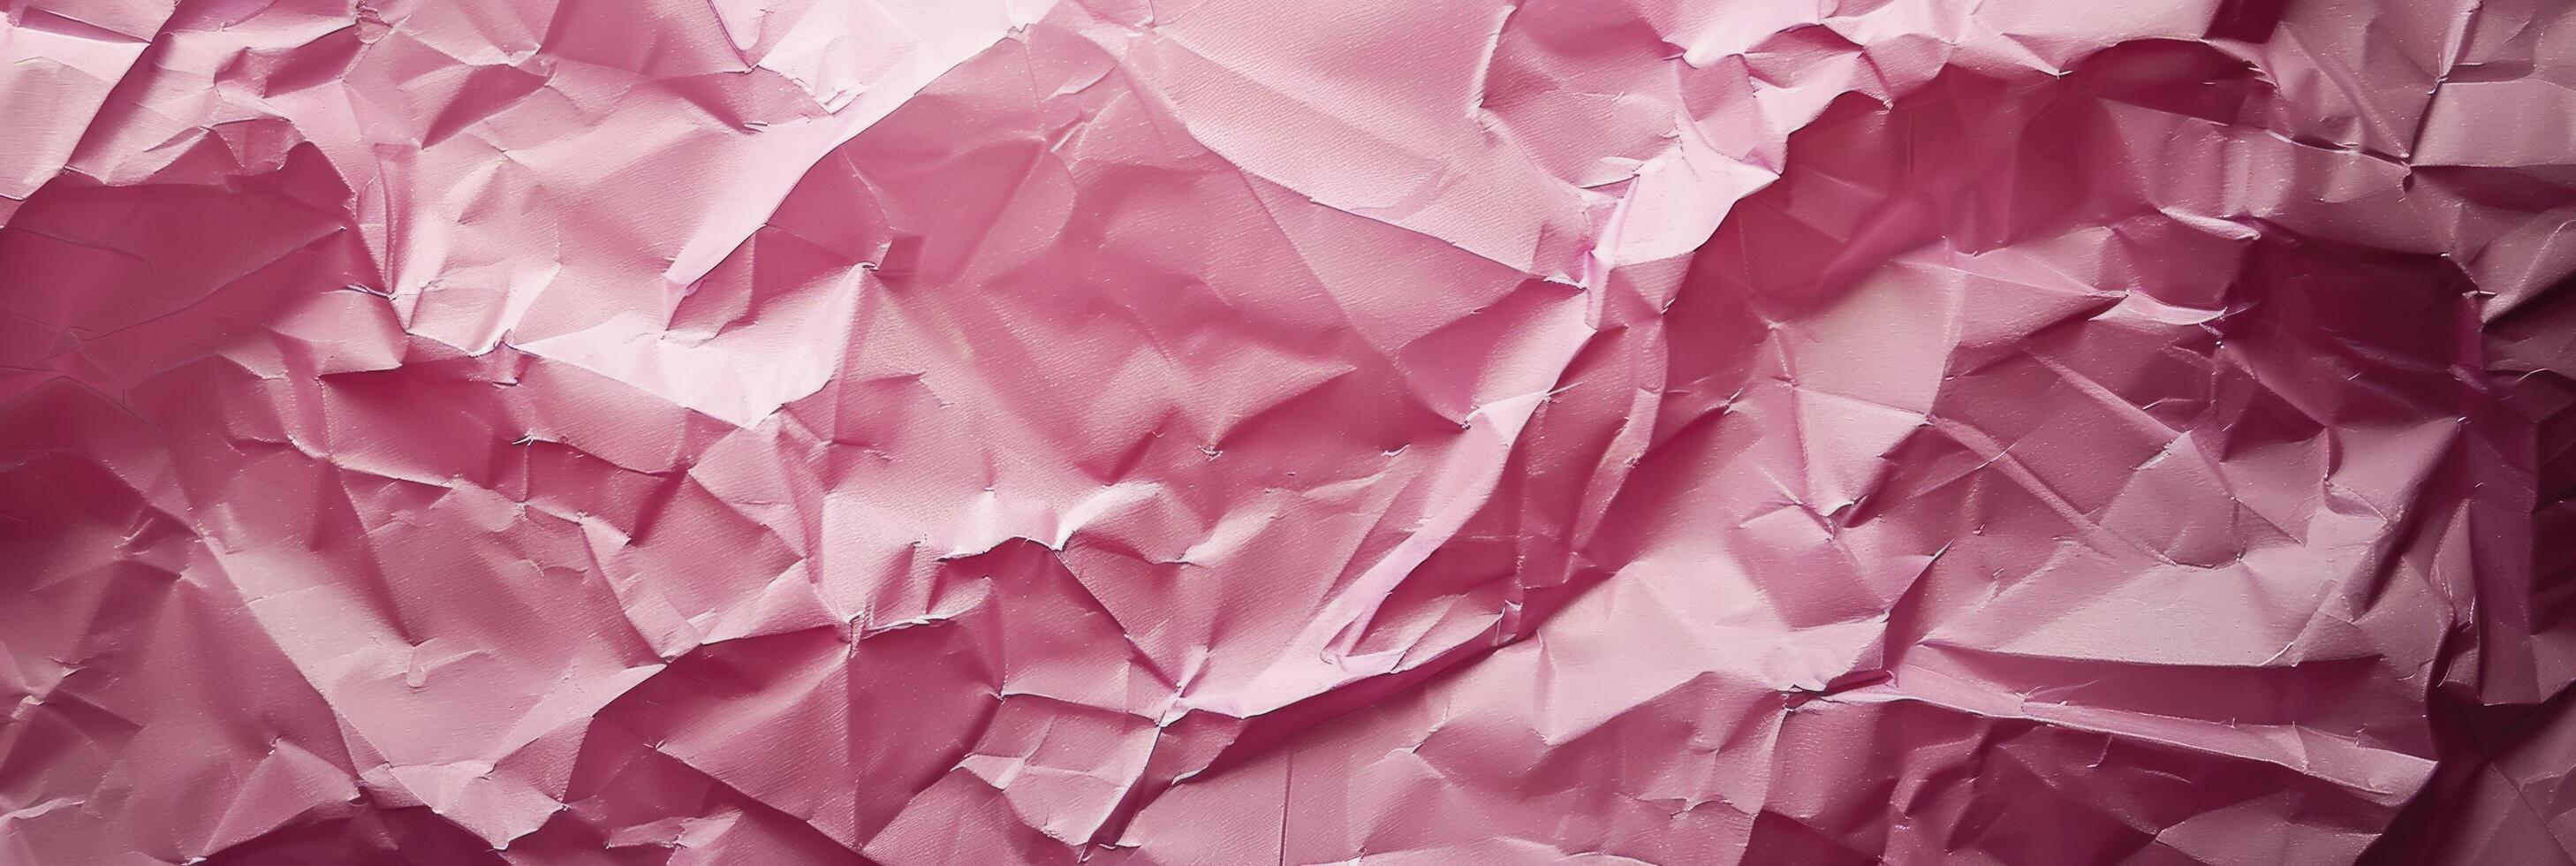 AI generated Pink Paper Poster Texture, Soft and Textured Background for Your Designs photo